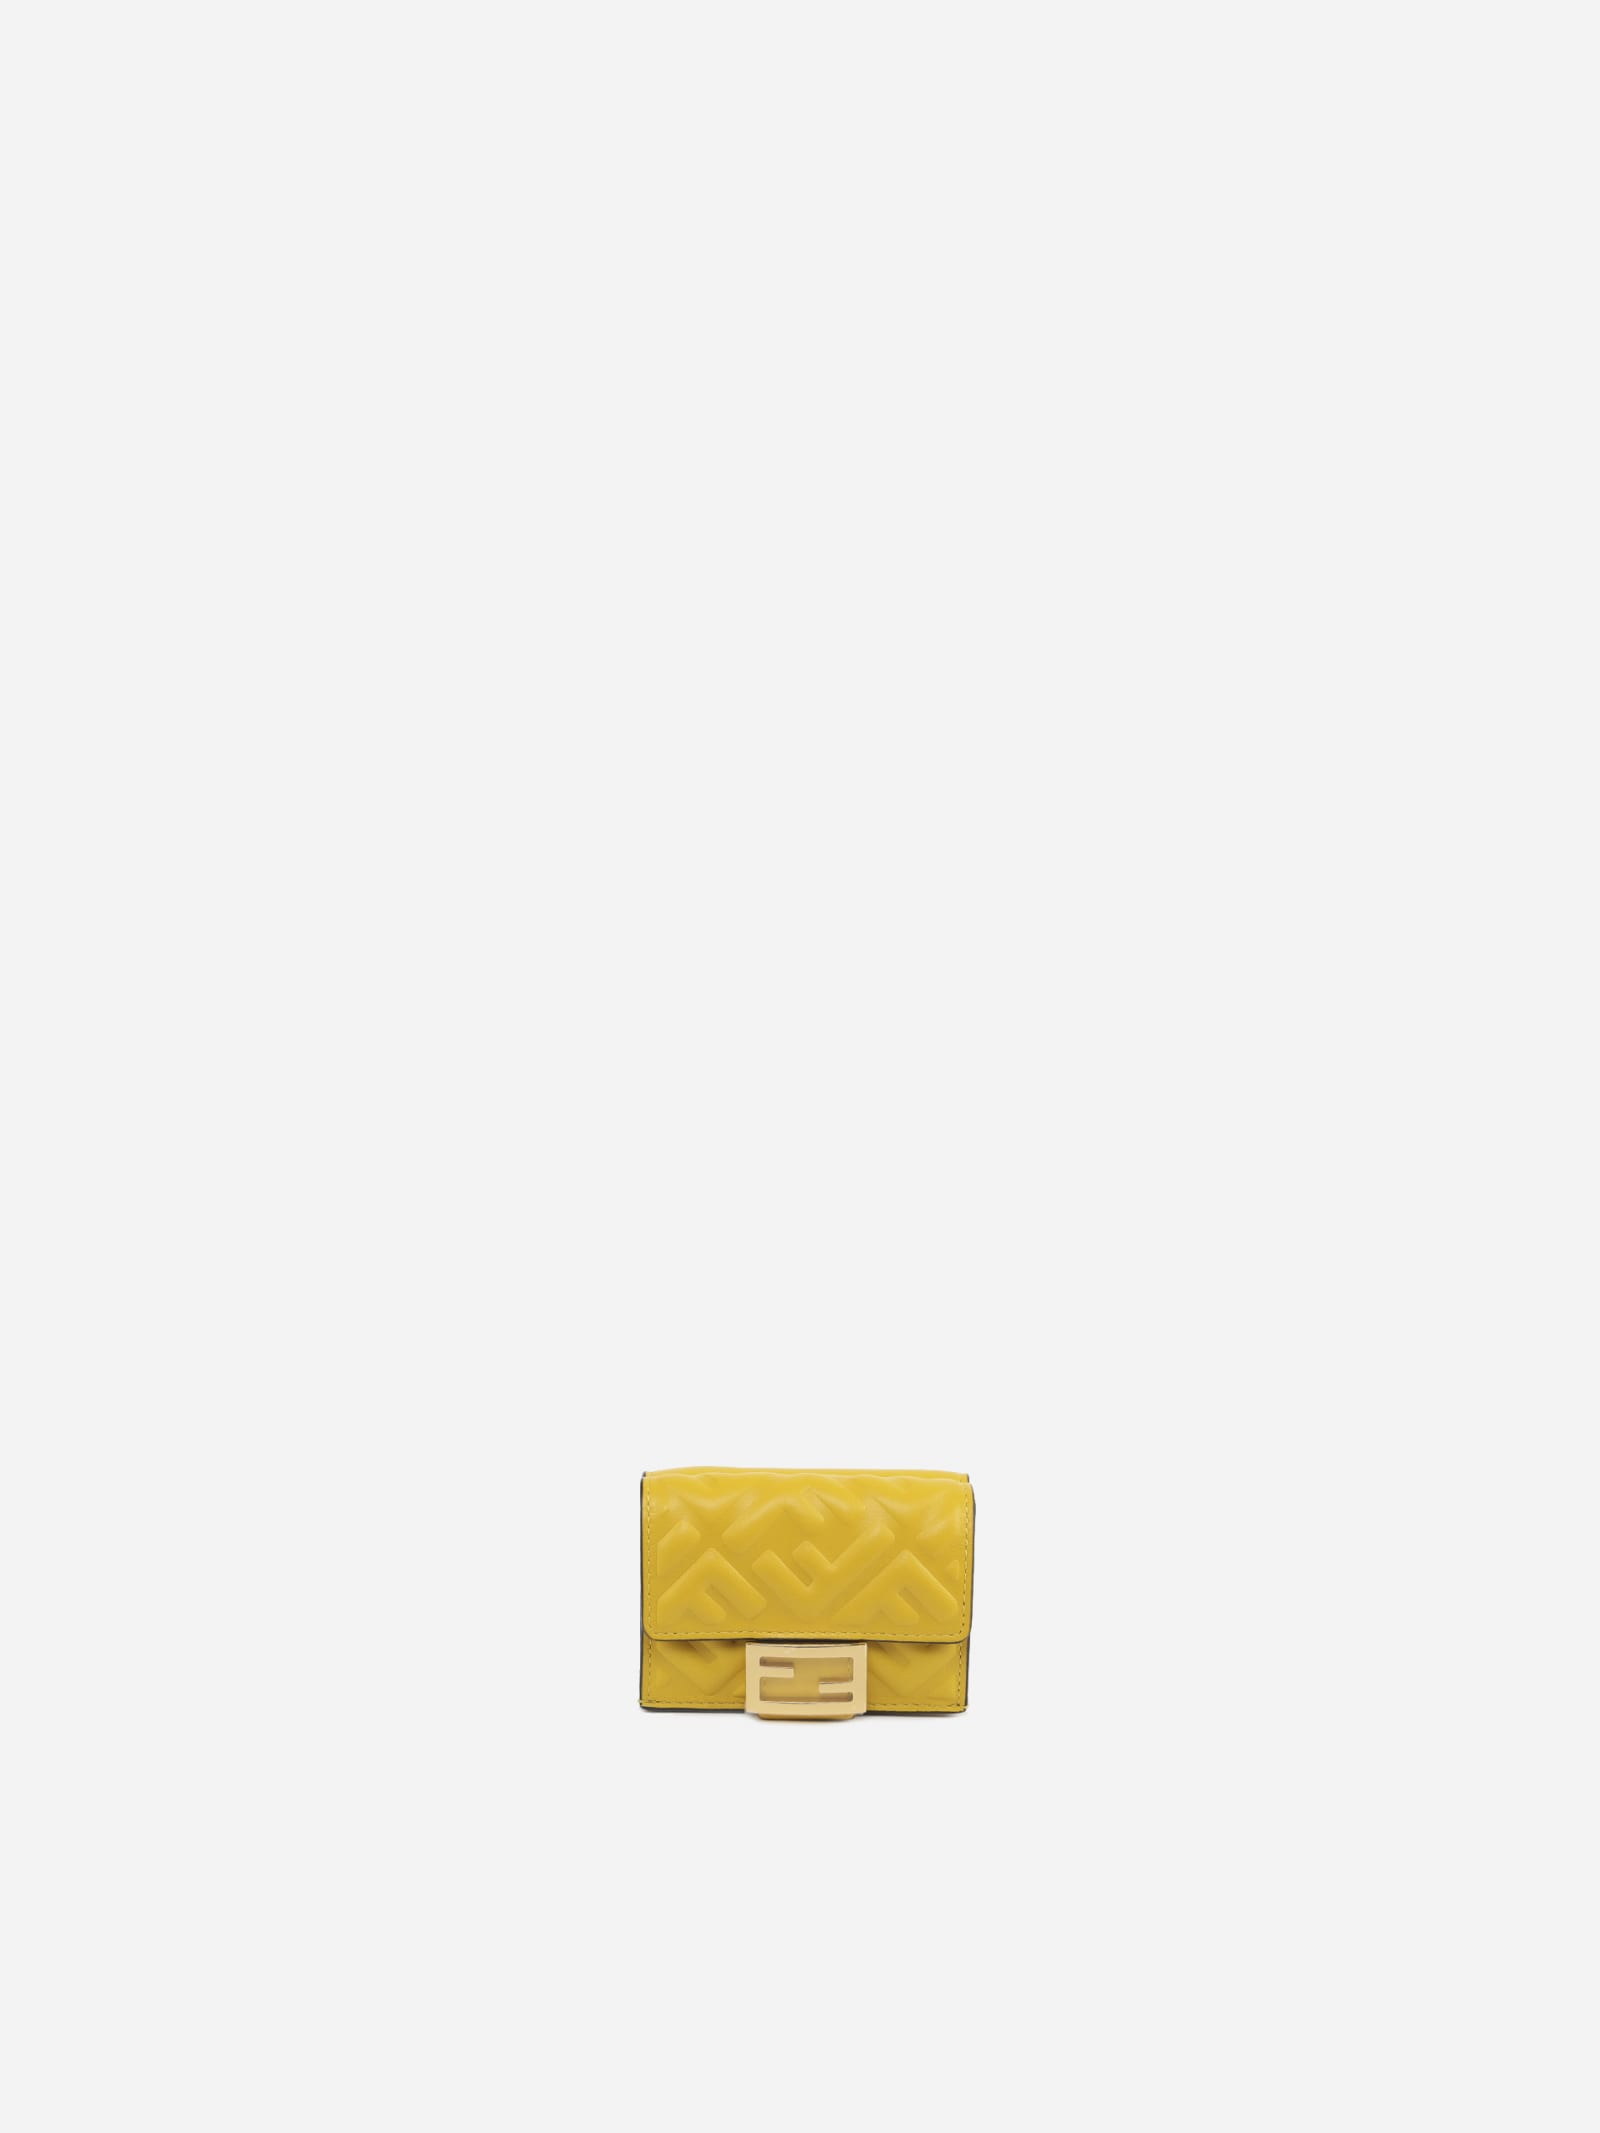 Fendi Baguette Wallet In Leather With All-over Ff Motif In Yellow